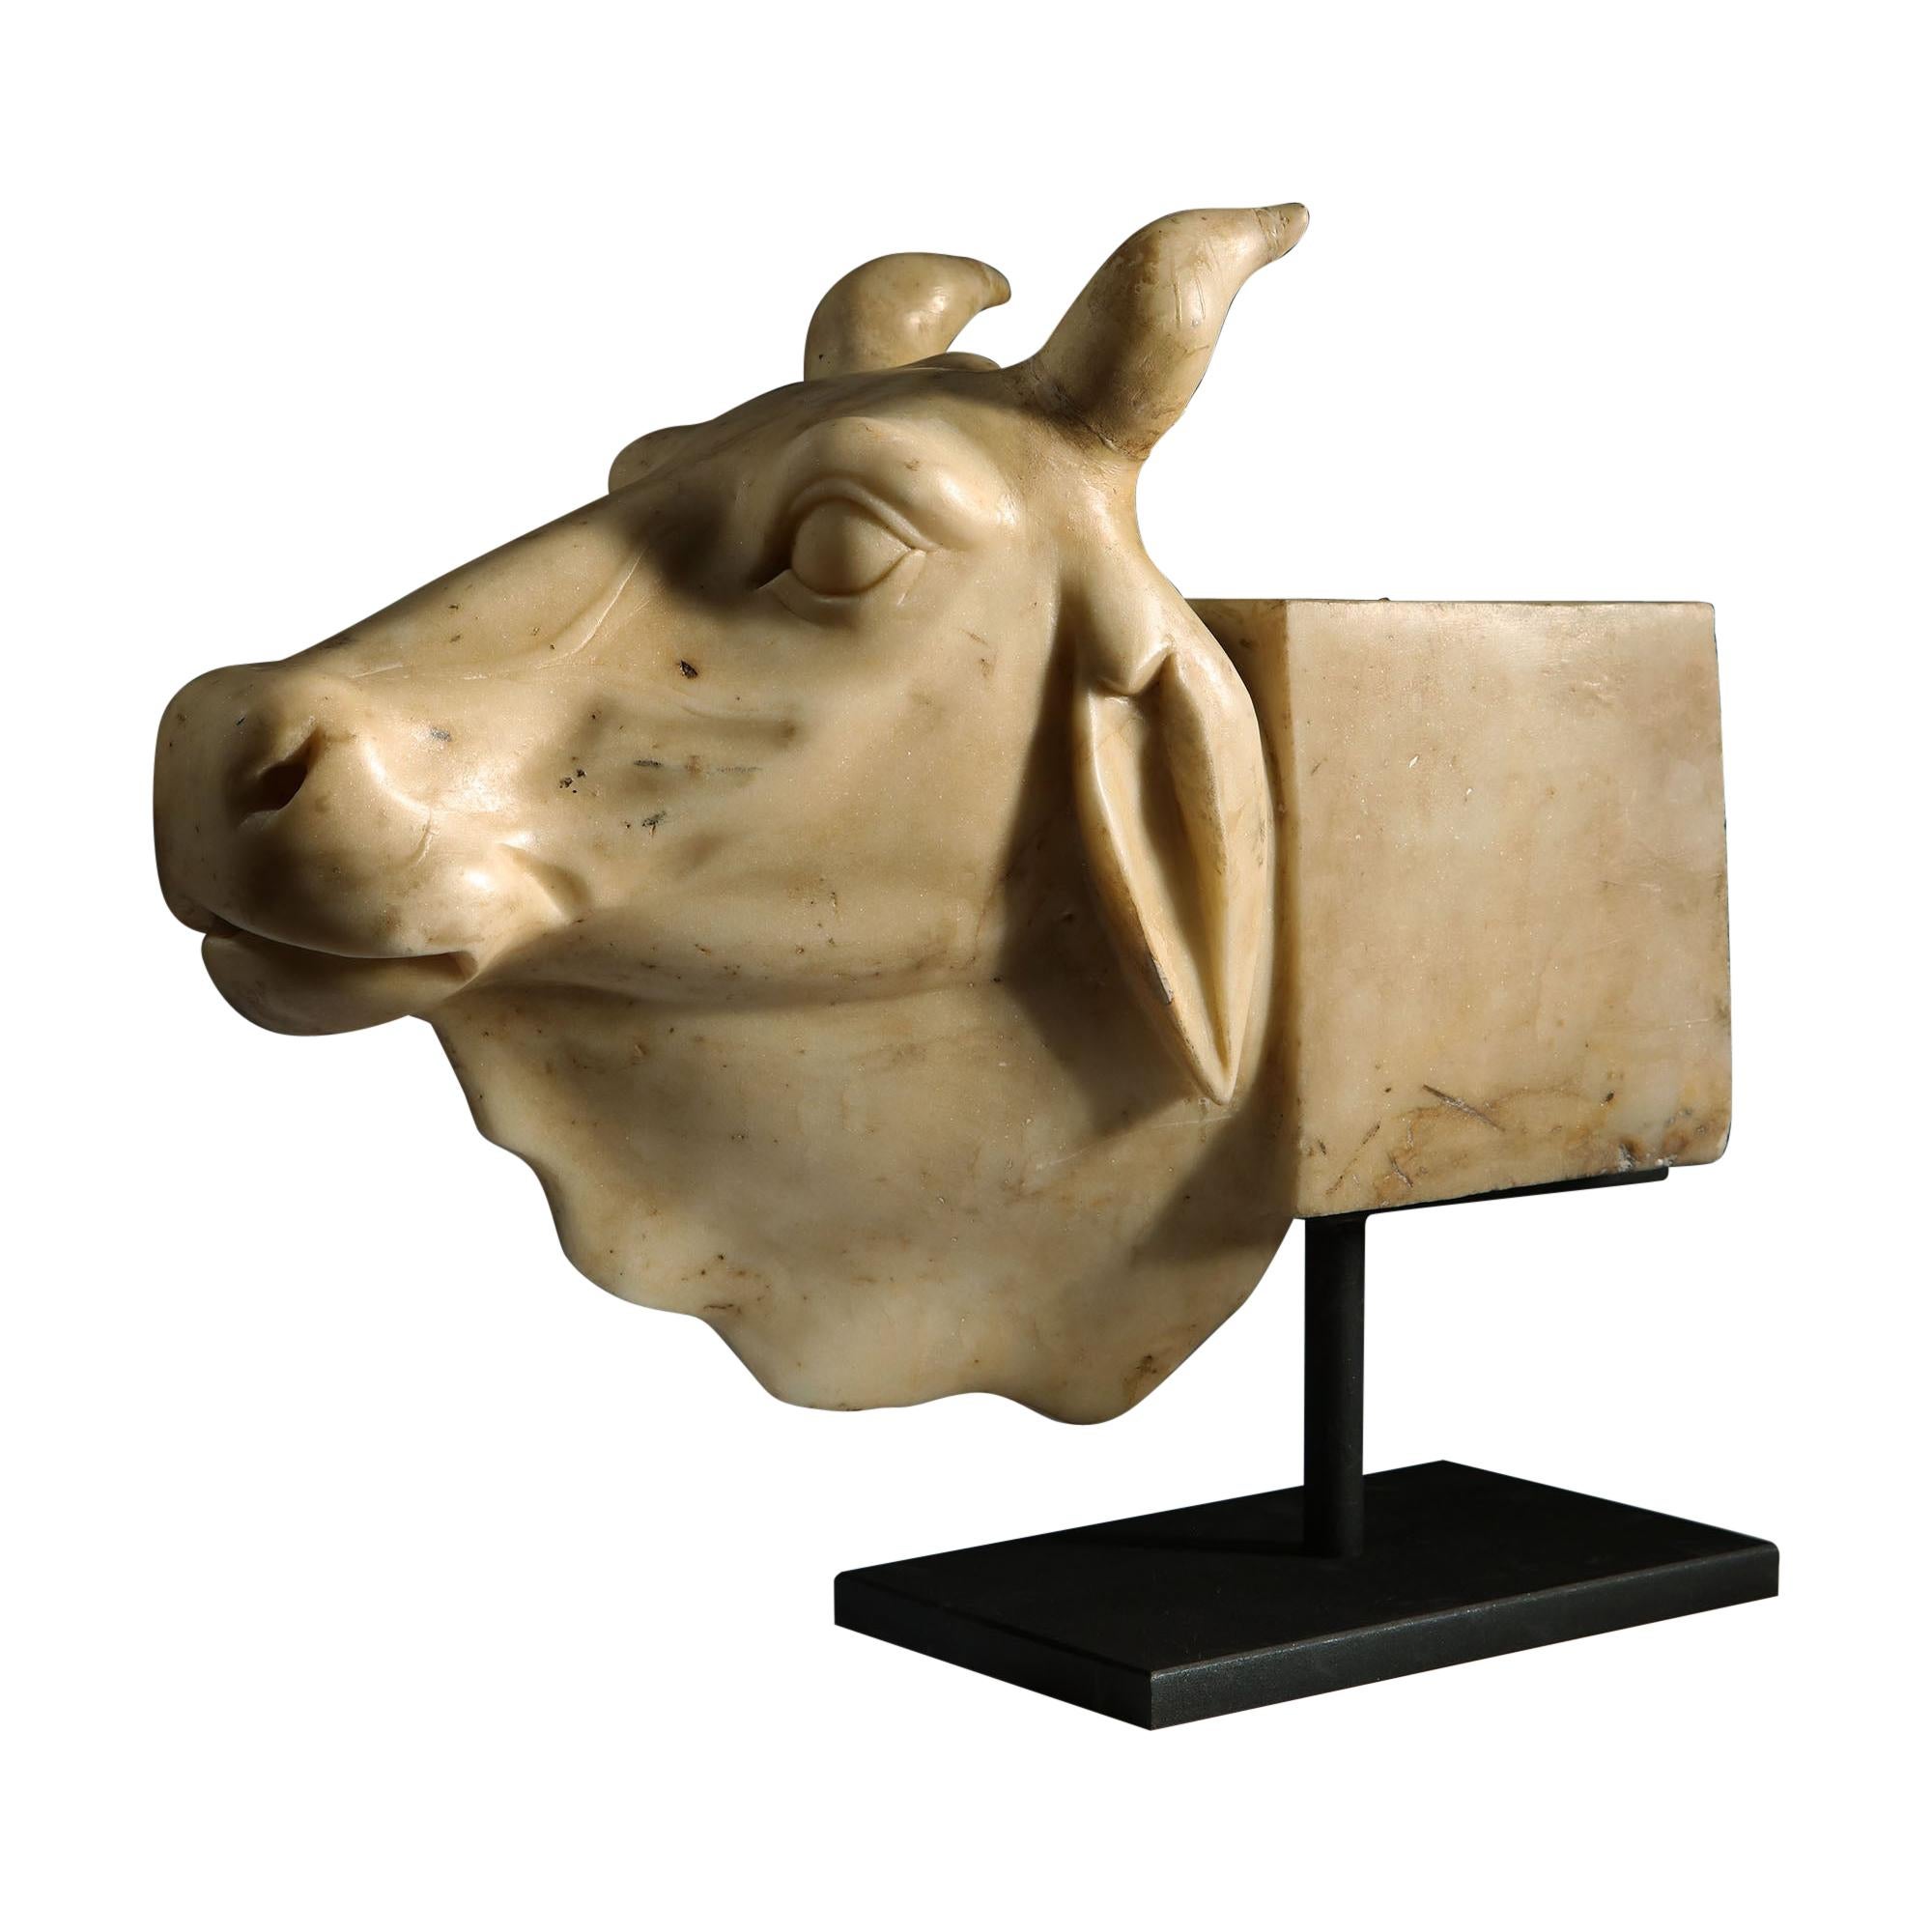 Late 19th Century White Marble Sculpture of an Indian Nandi Bull